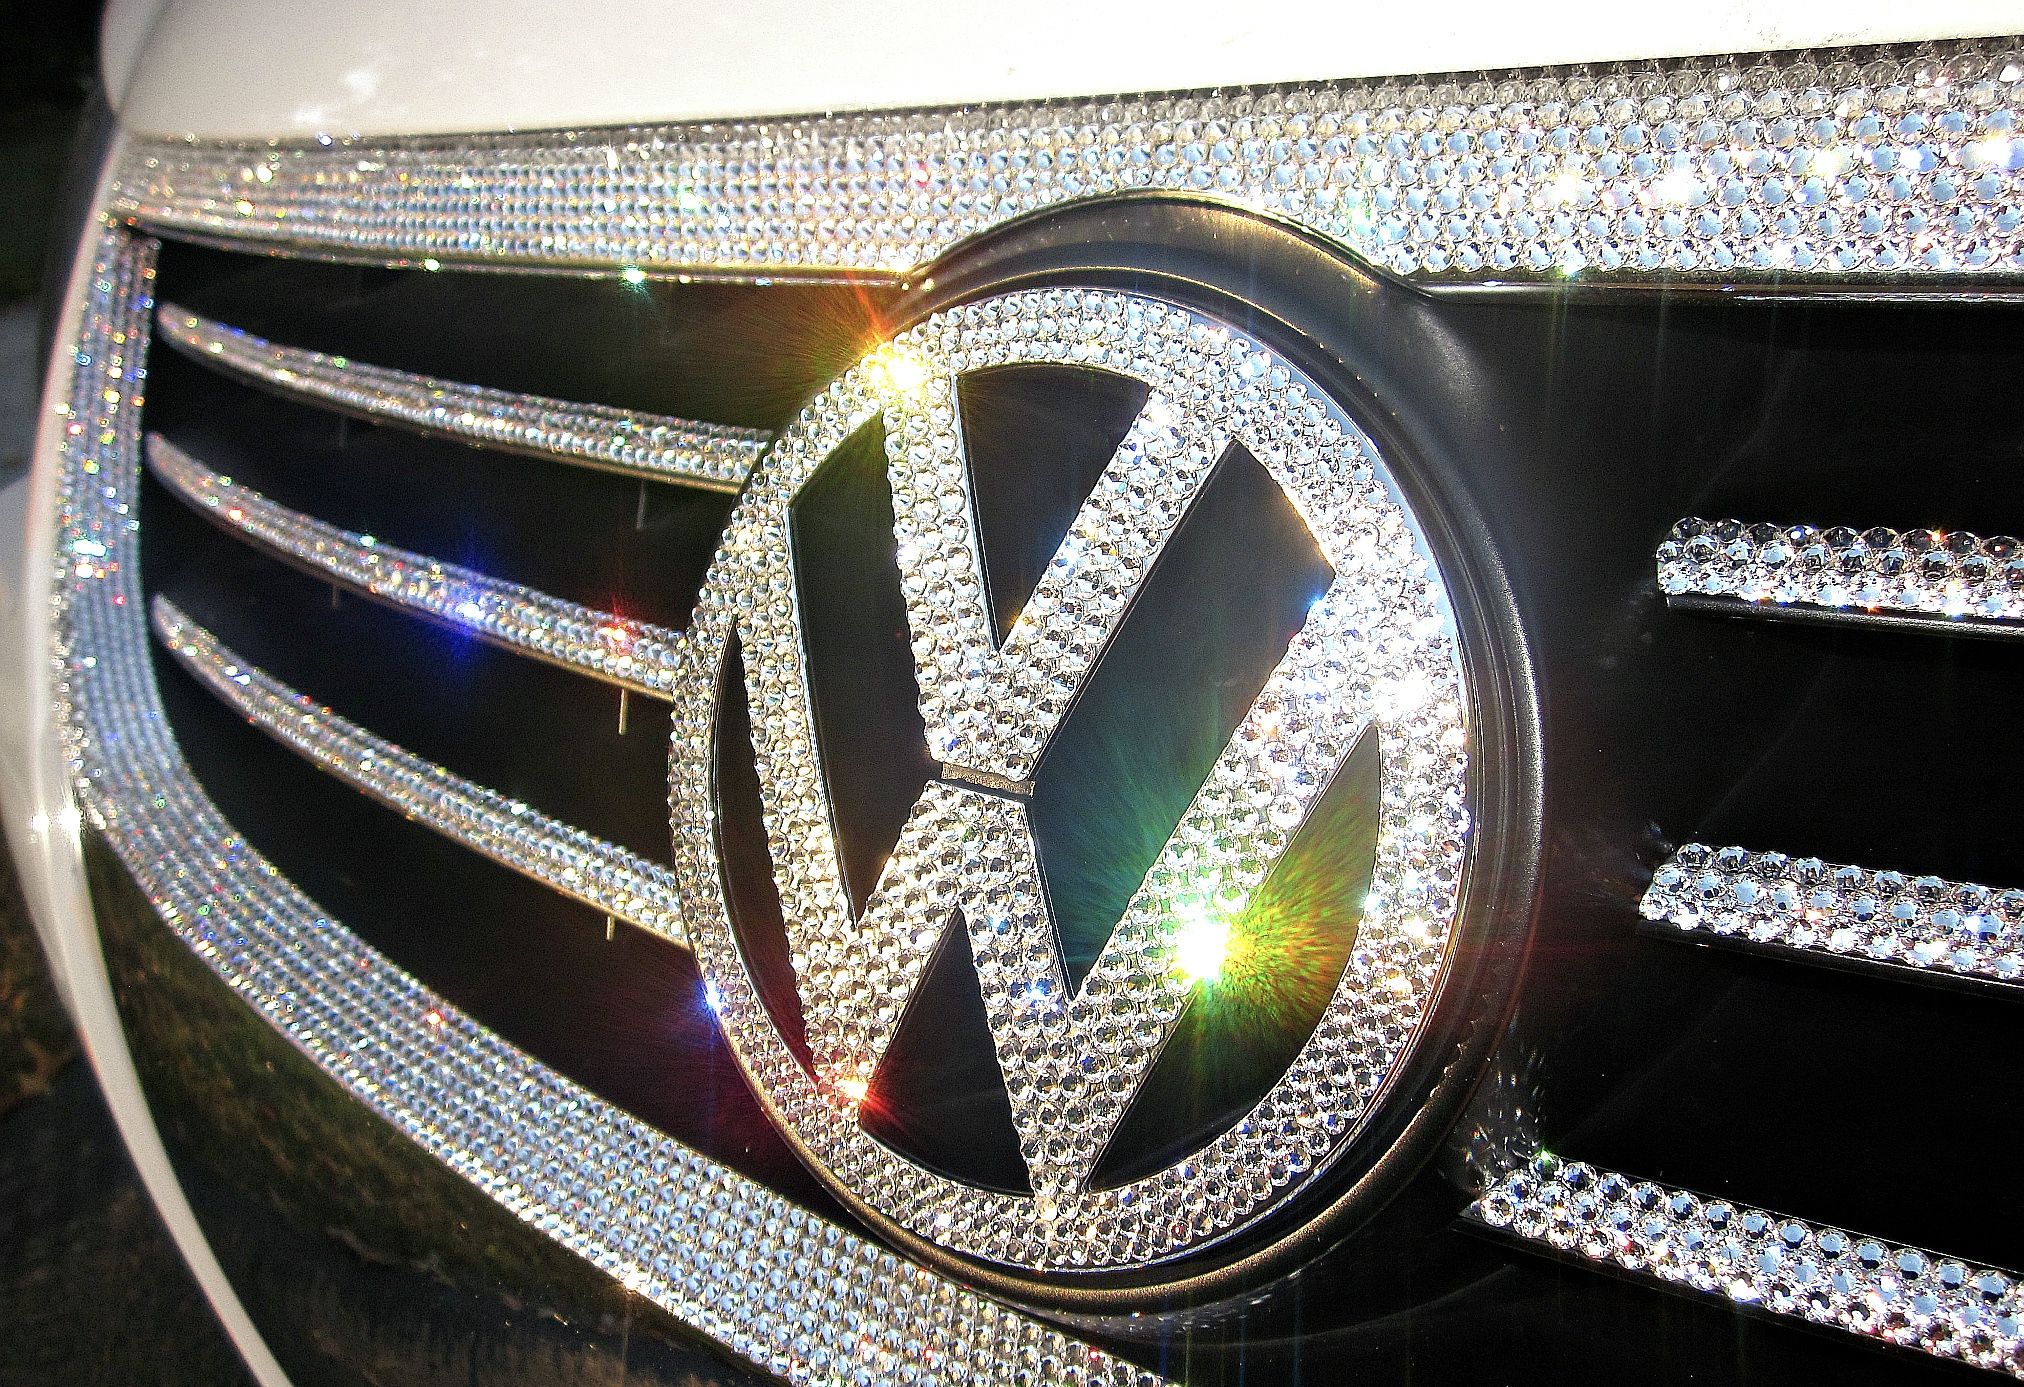 Buy Custom Vw Volkswagen Crystallized Car Emblem Bling Genuine European  Crystals Bedazzled, made to order from CRYSTALL!ZED by Bri, LLC